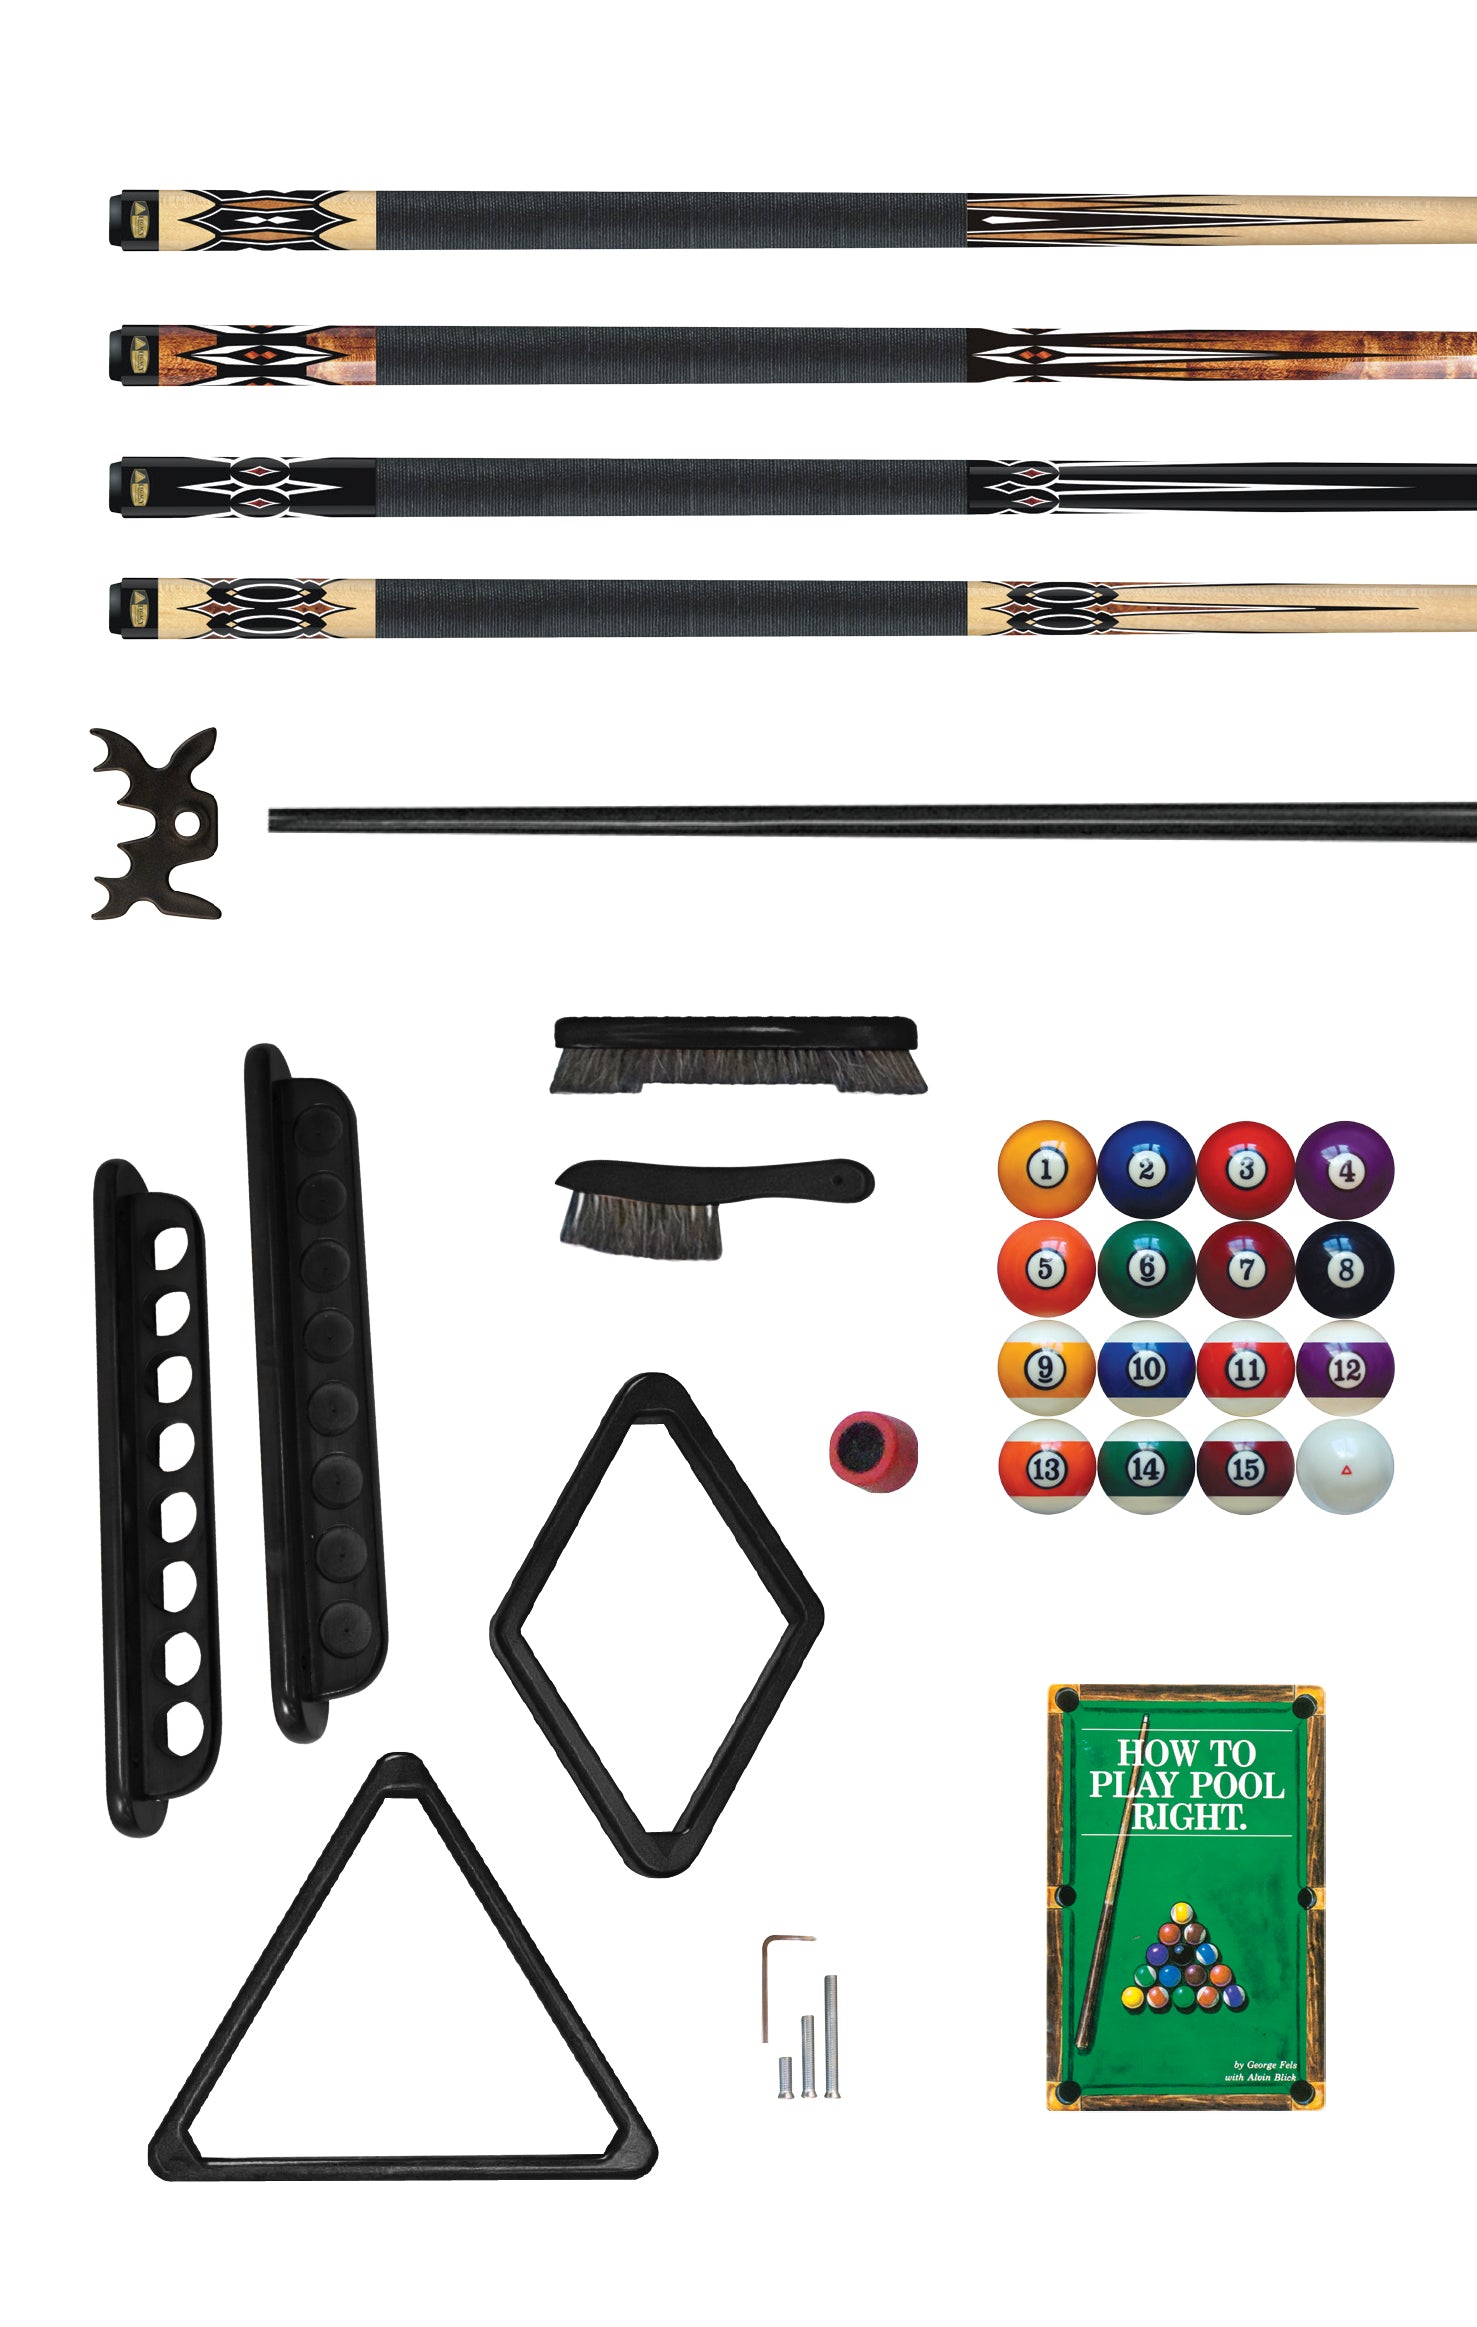 Sterling Billiards Accessory Kit - With Pool Table Purchase